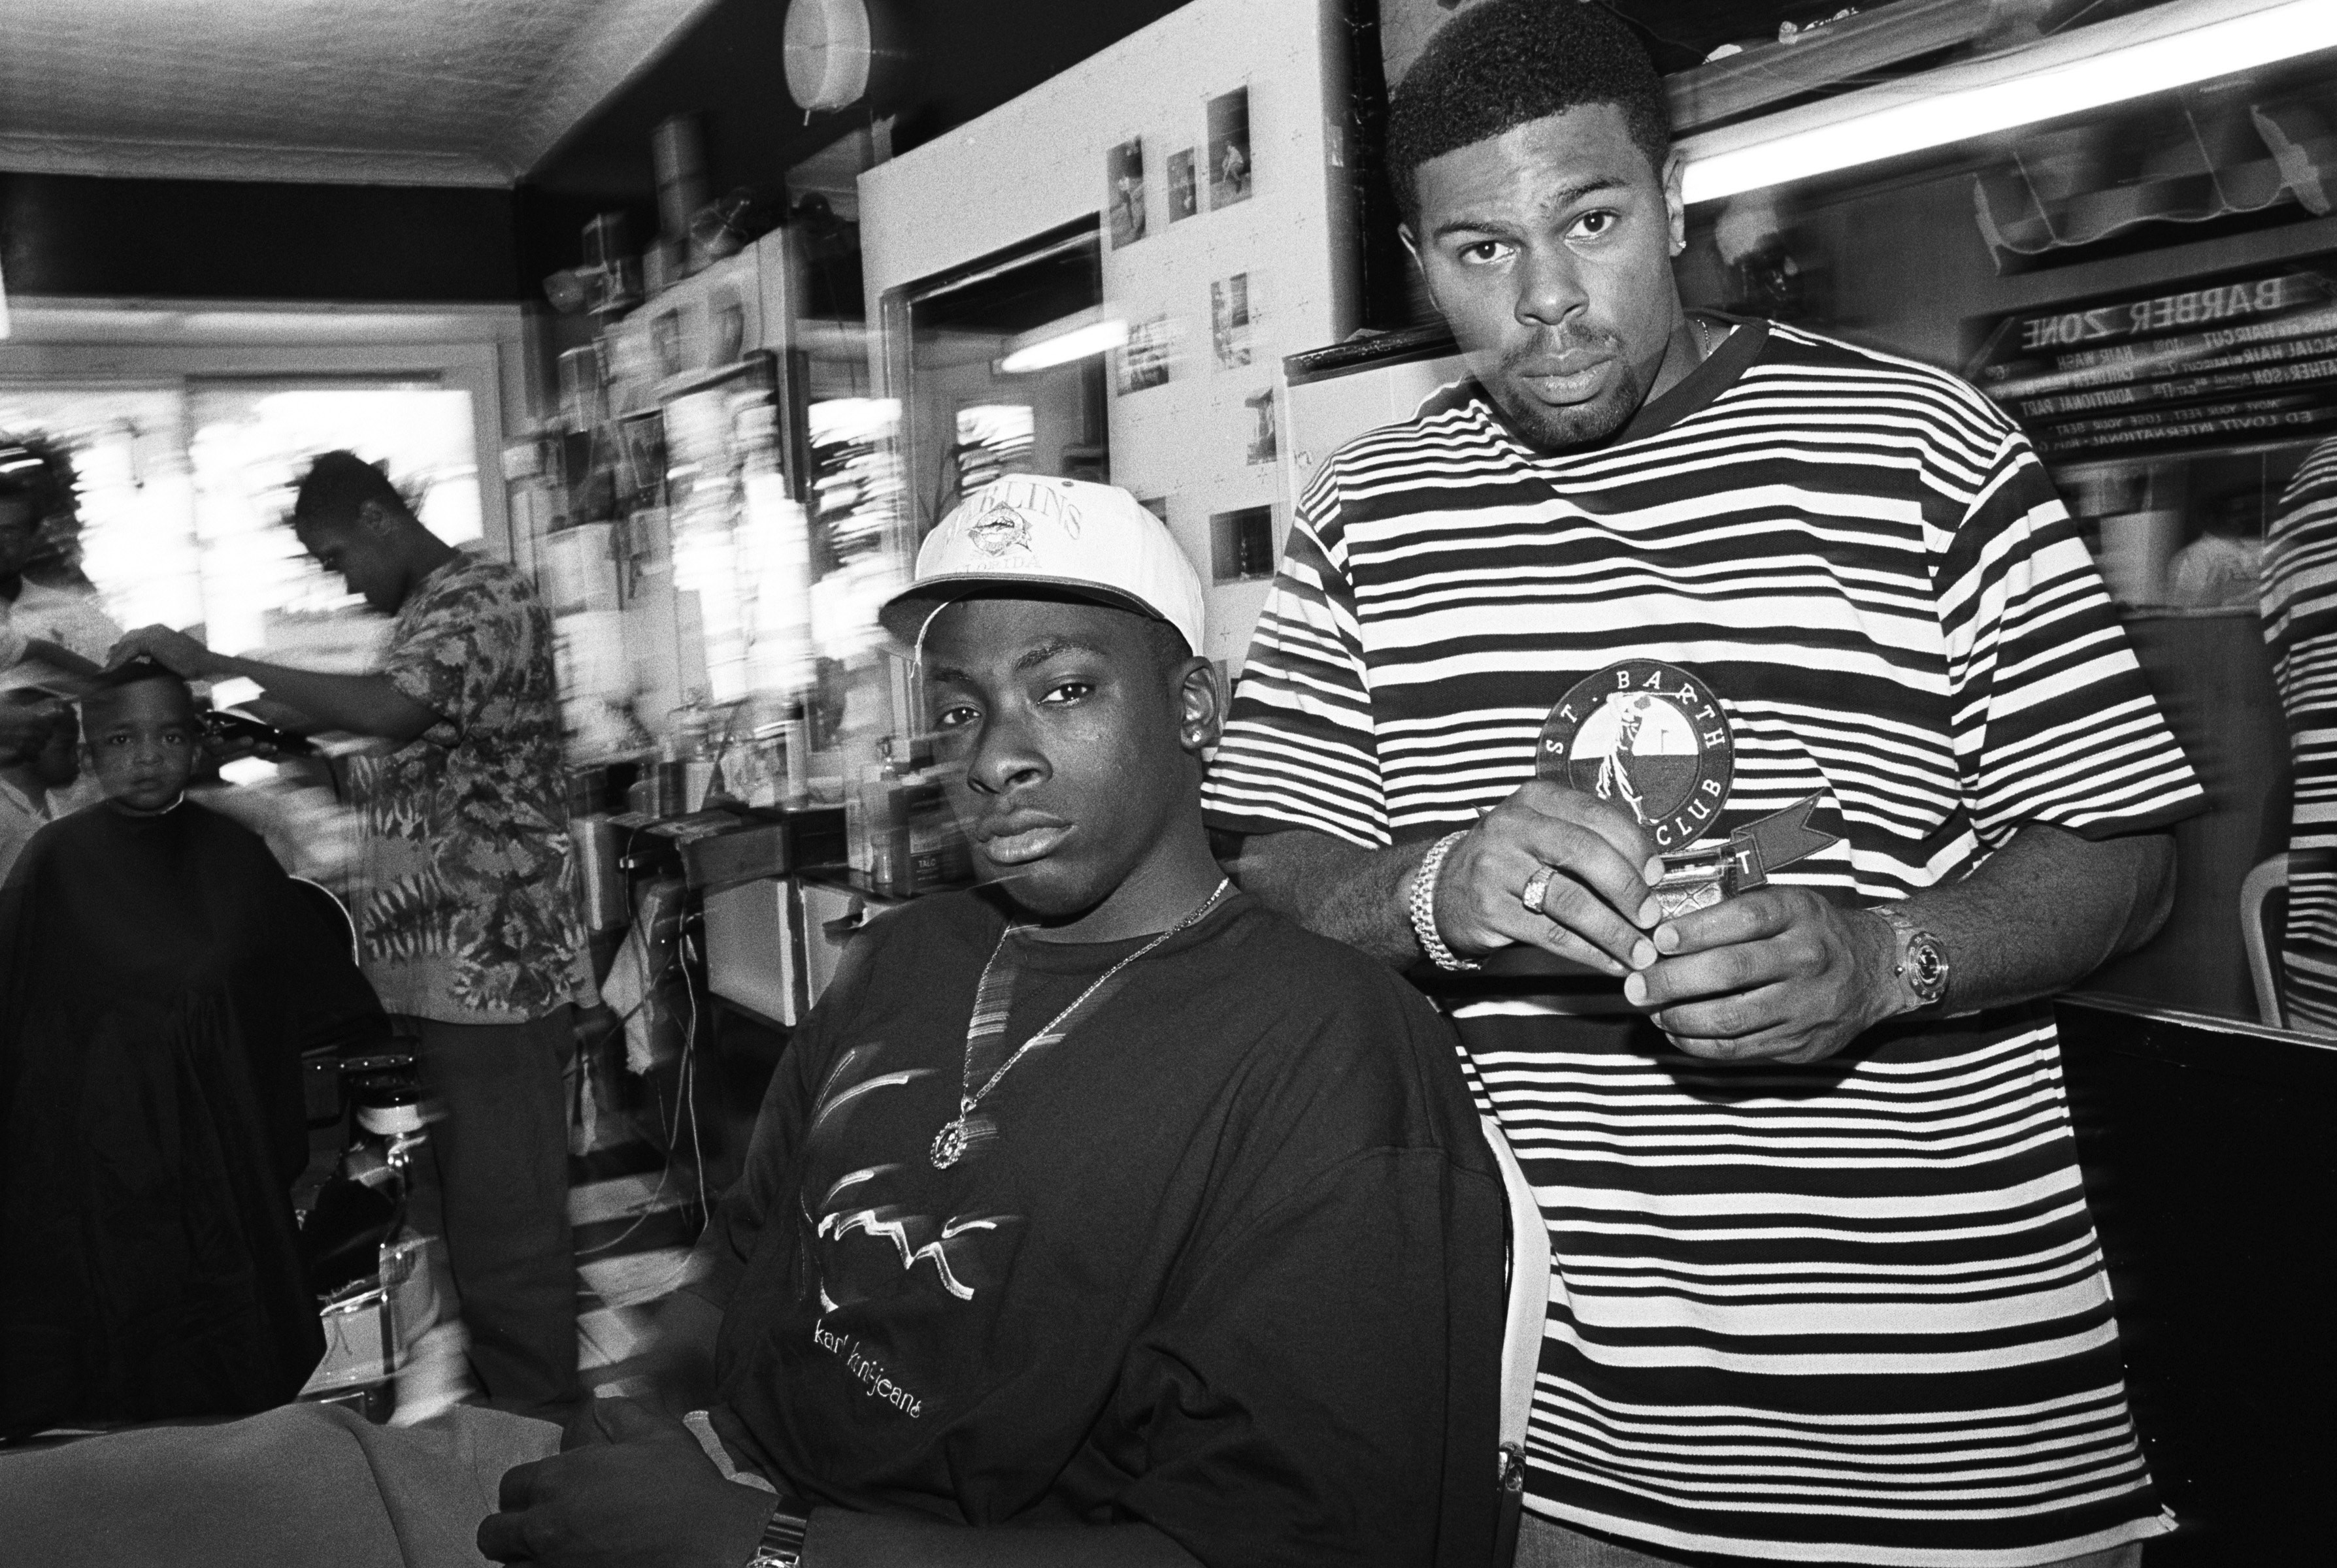 After 22 Years, Pete Rock and CL Smooth Are Finally Ready to Make New